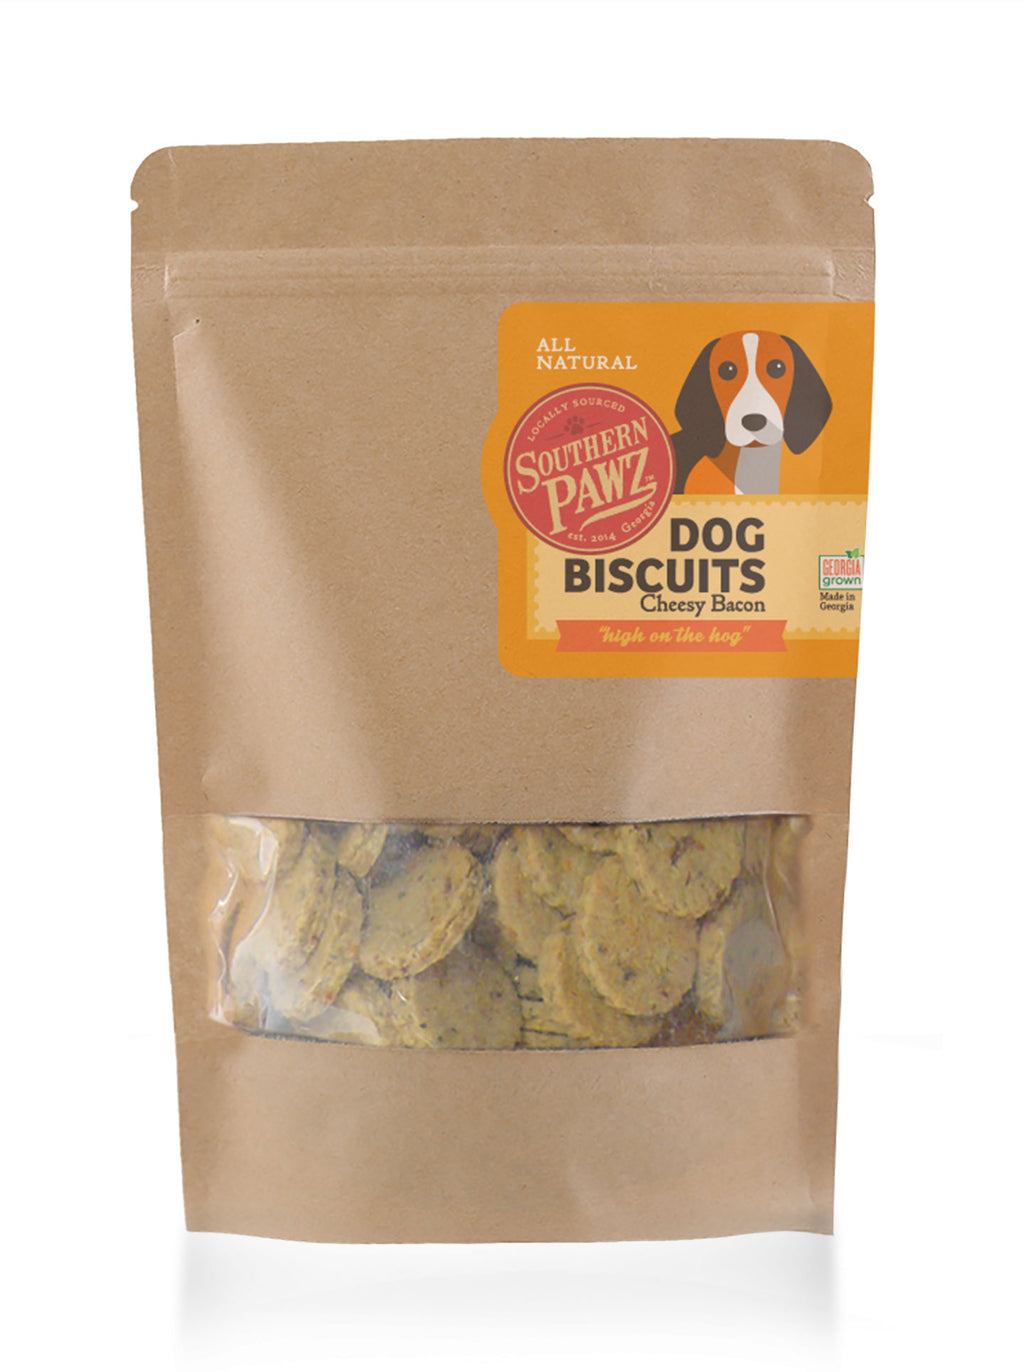 Dog Biscuits - Cheesy Bacon 16 oz. Resealable Bag (Choose Cookie Size or Little Bites)